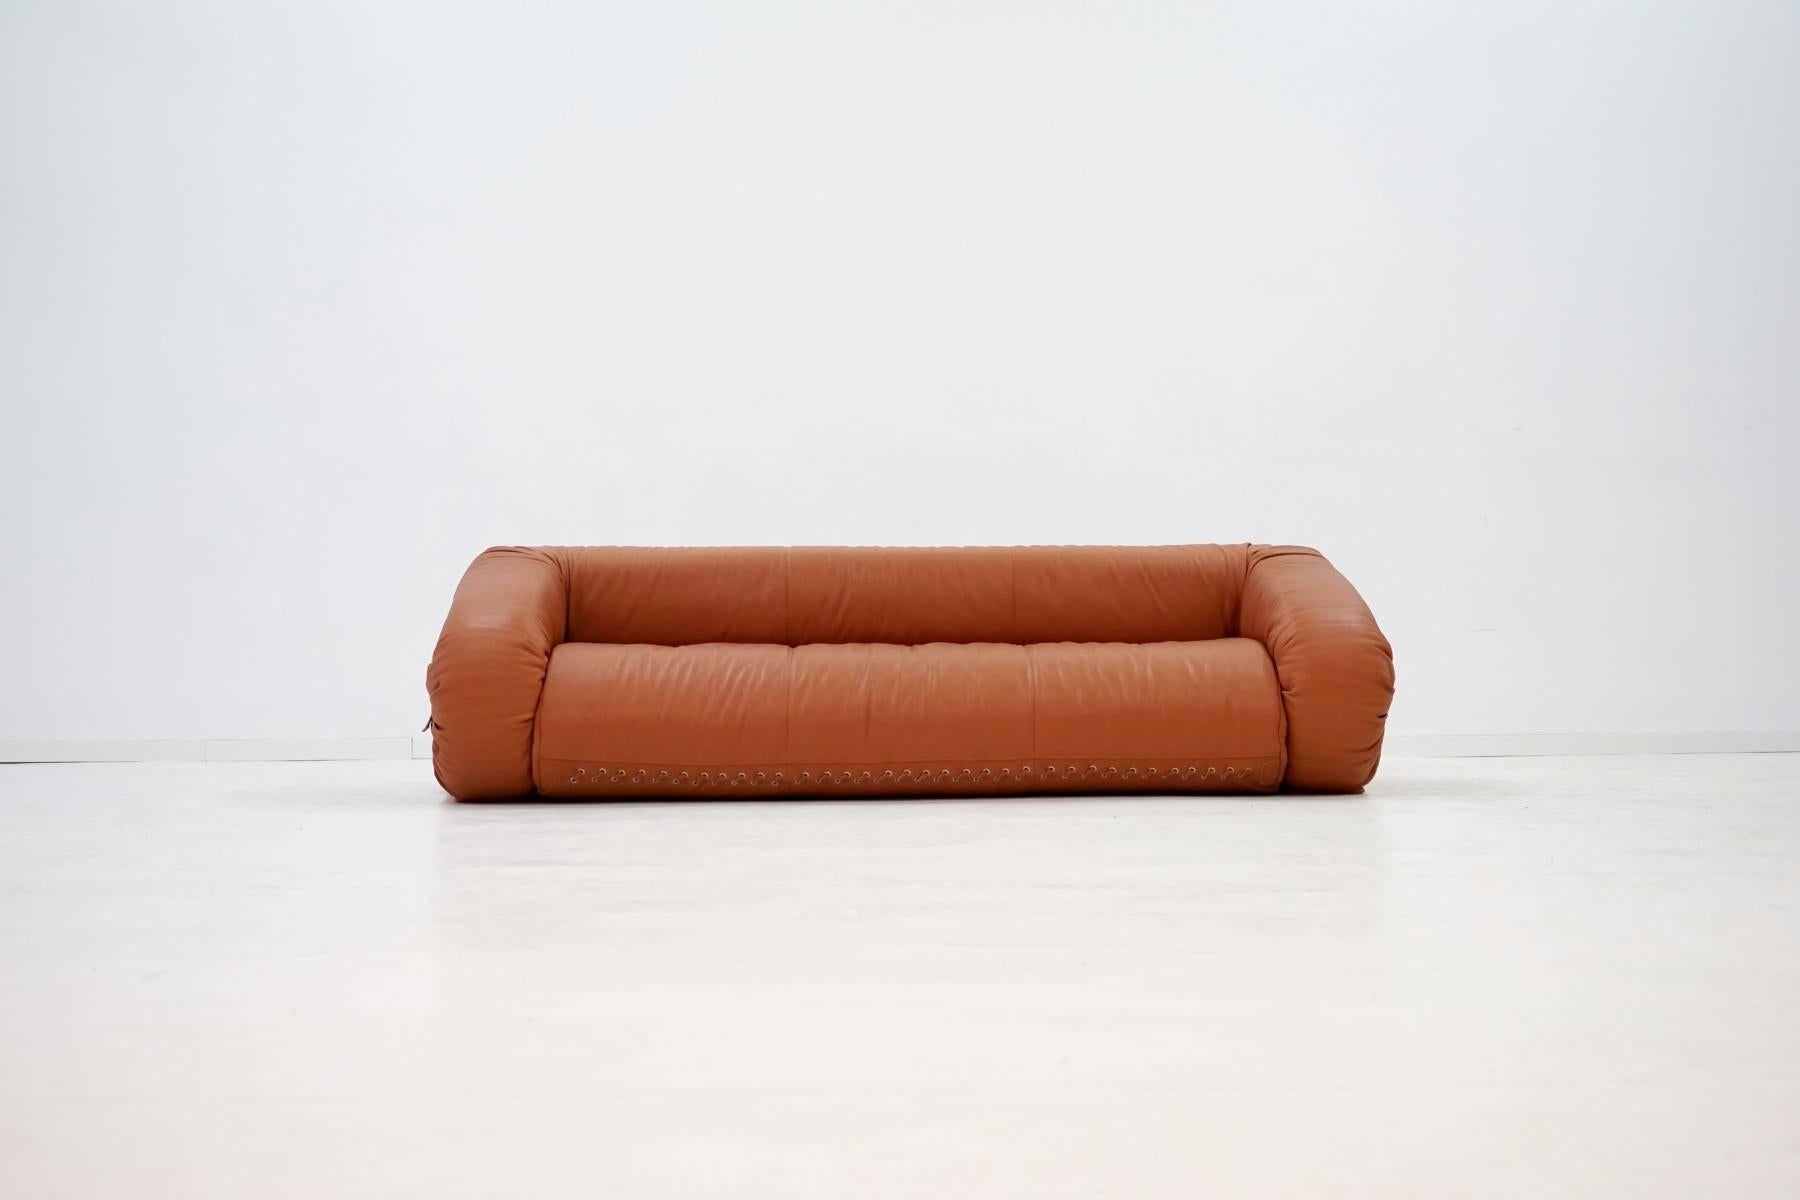 Anfibio by Alessandro Becchi, Giovannetti Italy sofa daybed canapé couch leather
This rare sofa is only a few years old and was not used at all. The leather and the lying area are perfect. This Anfibio is the big version and can be used as a double